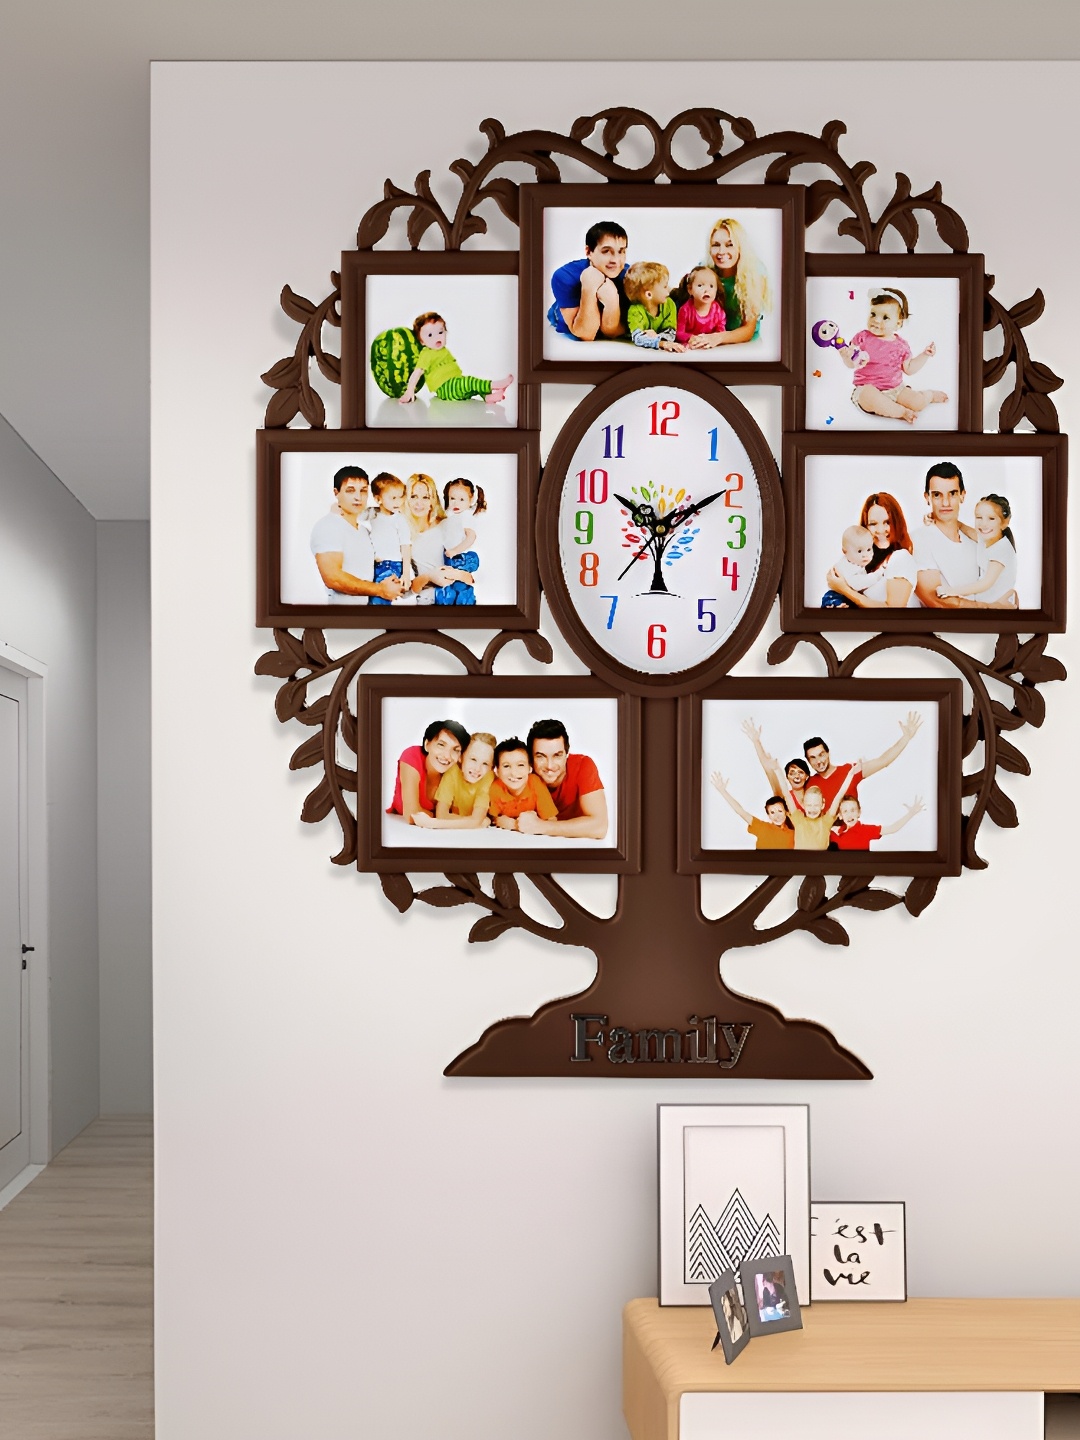 

Attractionz Brown & White Oval Shaped Contemporary Analogue Wall Clock